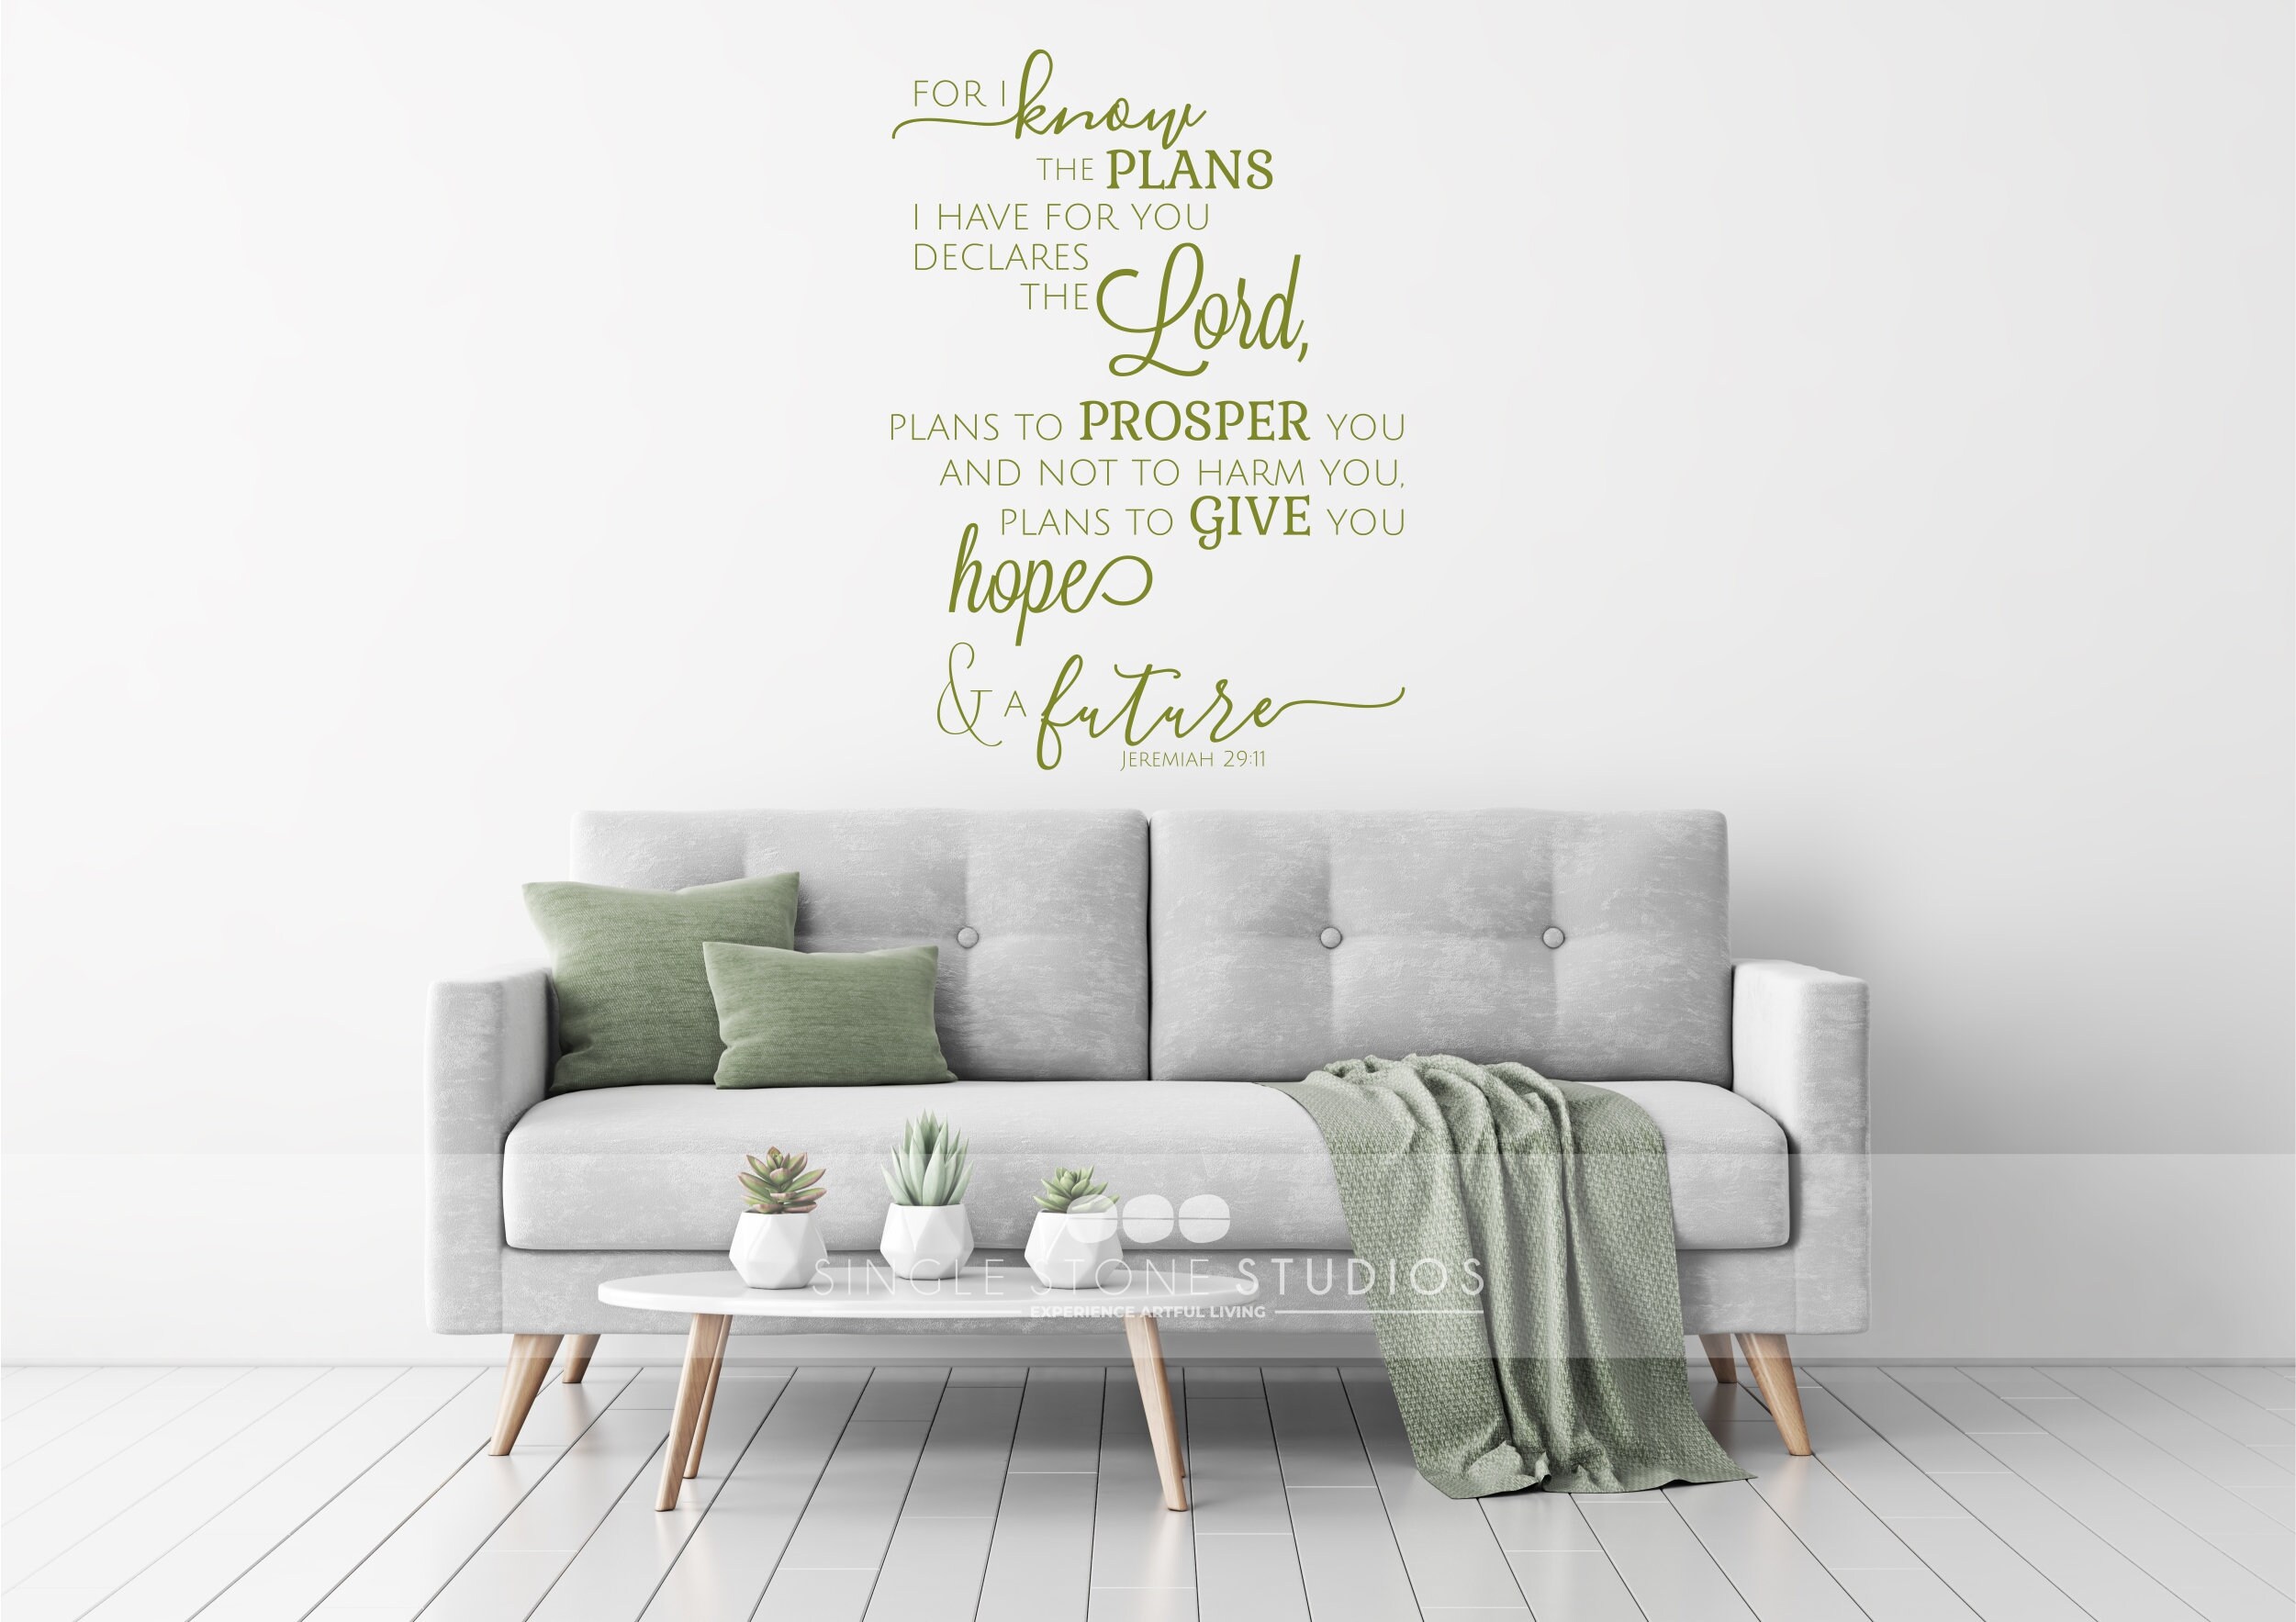 Jeremiah 29:11 Bible Verse Wall Vinyl Wall Stickers Art Diy Quote Window  Home Living Room Decal Church Poster - Wall Stickers - AliExpress